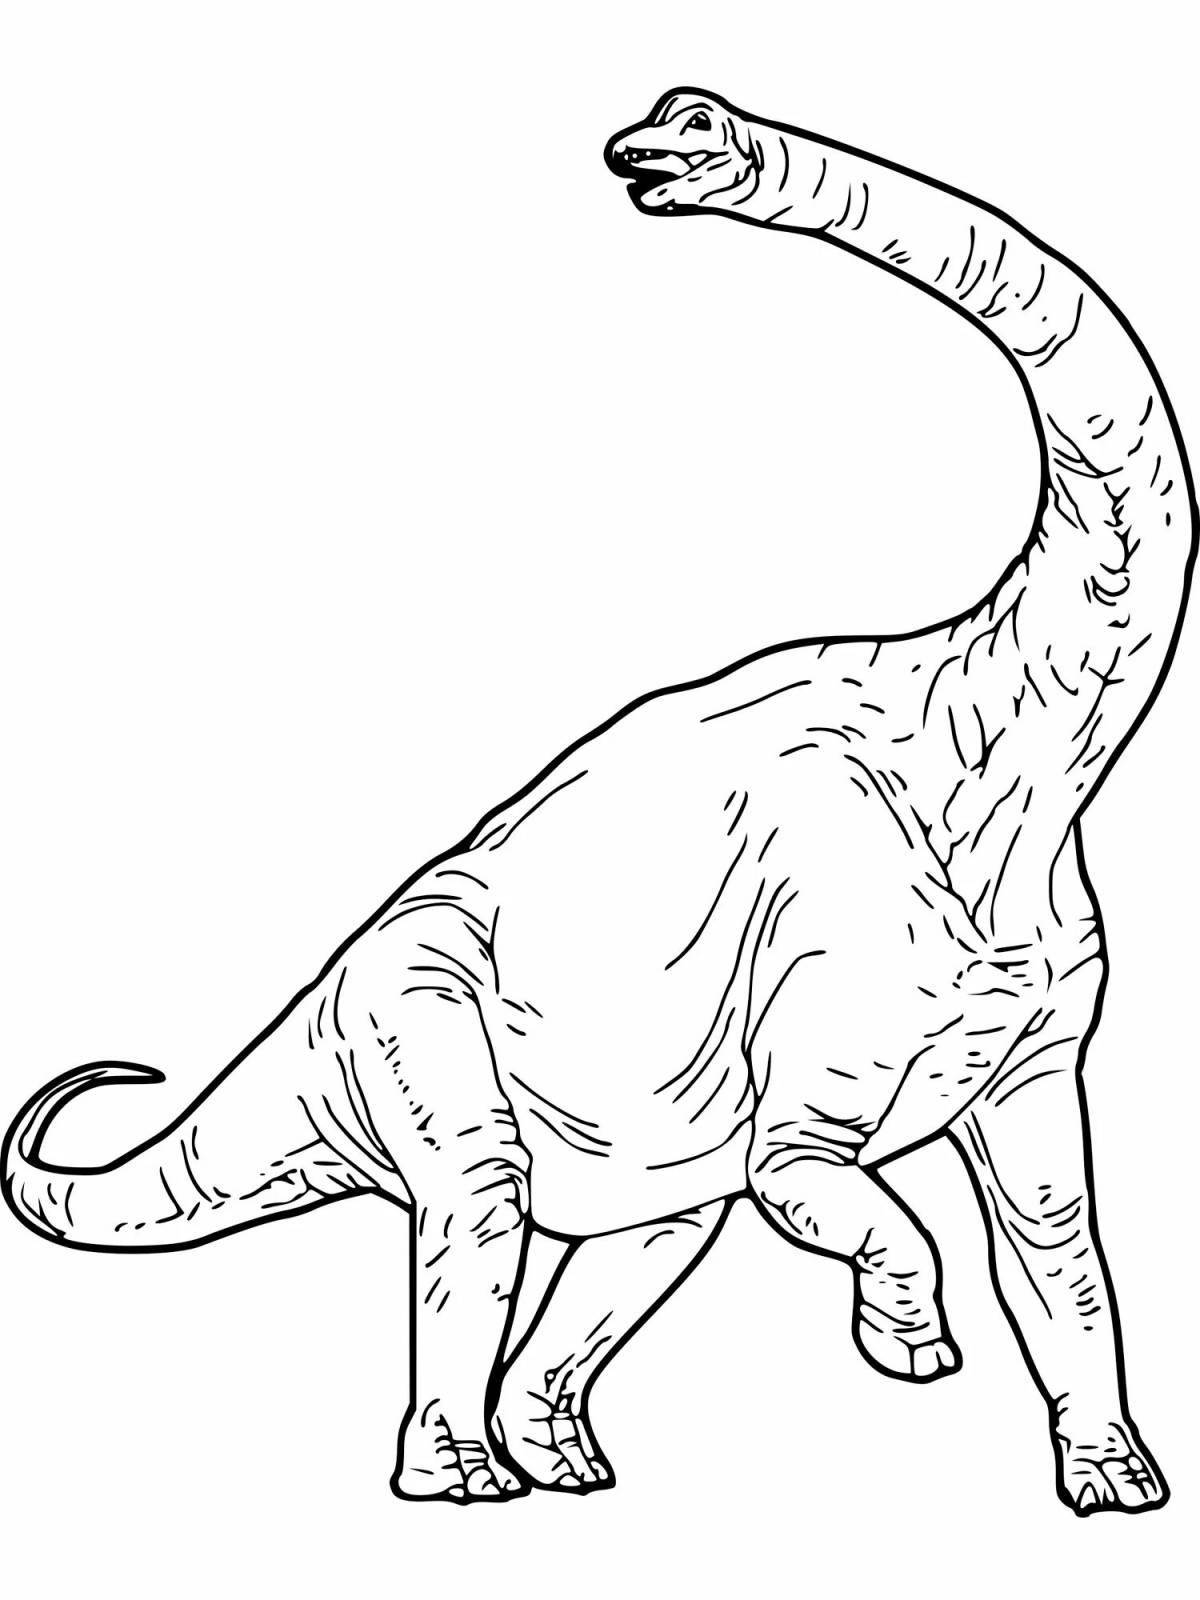 Animated dinosaur herbivore coloring page